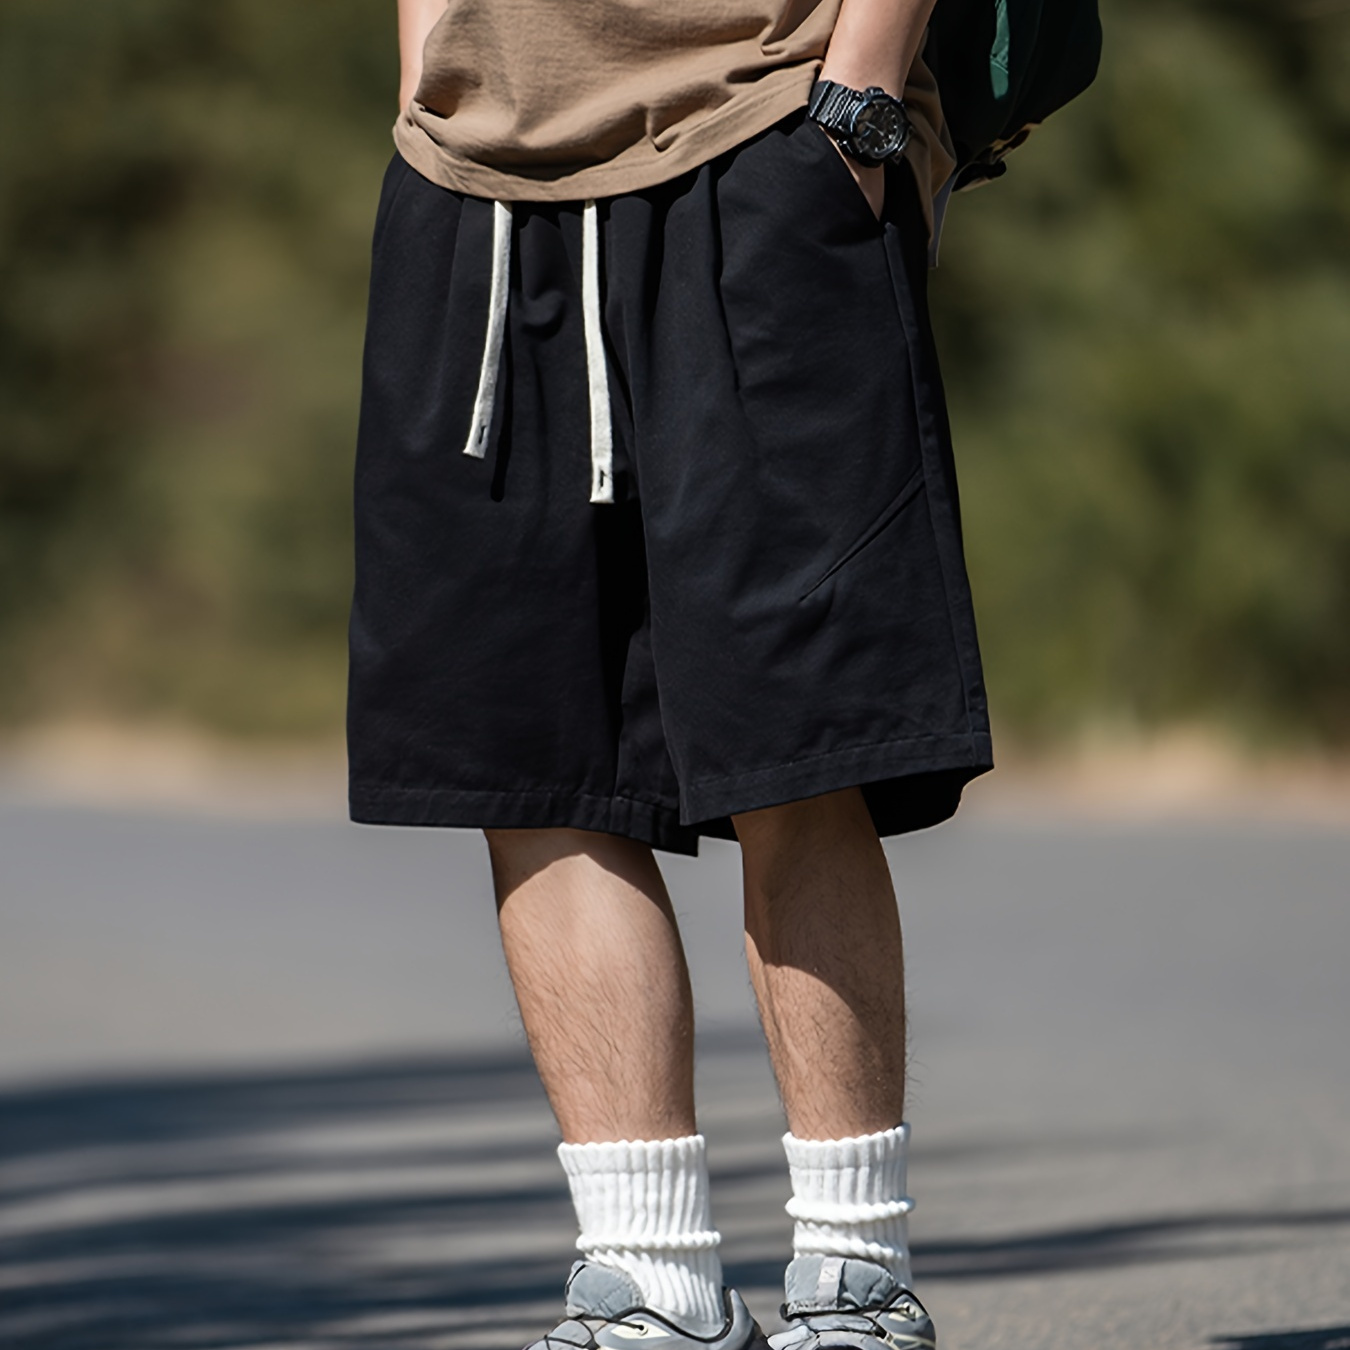 

Men's Loose Solid Shorts With Pockets, Casual Cotton Blend Elastic Waist Drawstring Shorts For Summer